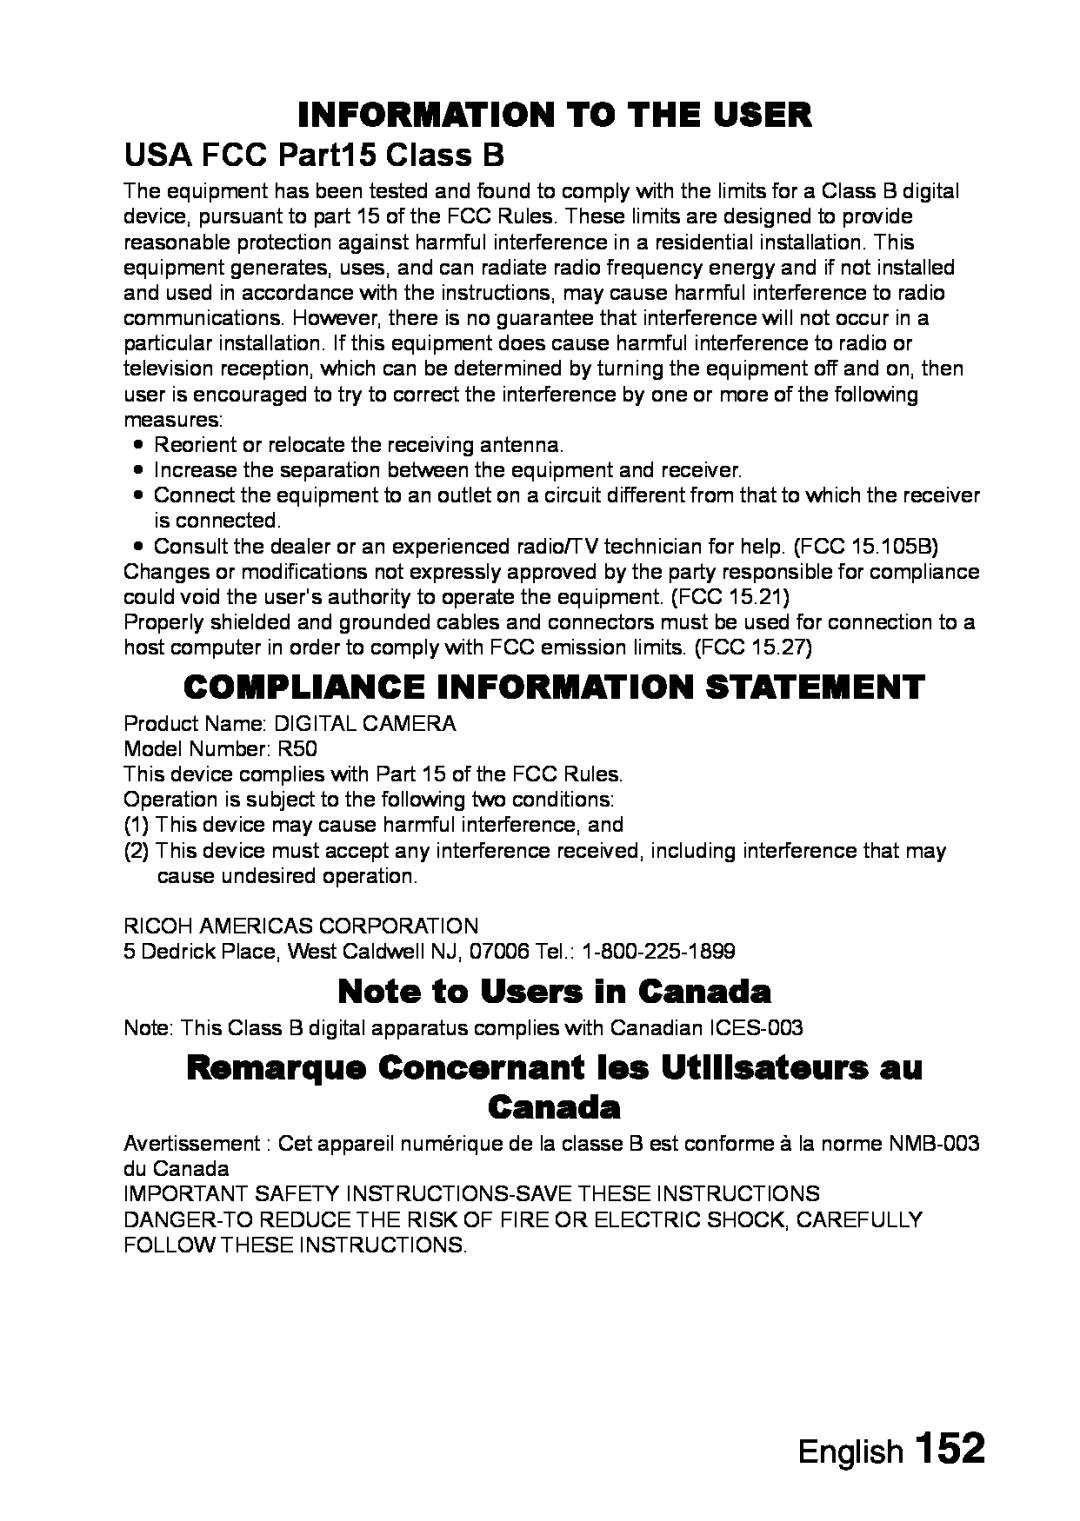 Samsung R50 INFORMATION TO THE USER USA FCC Part15 Class B, Compliance Information Statement, Note to Users in Canada 